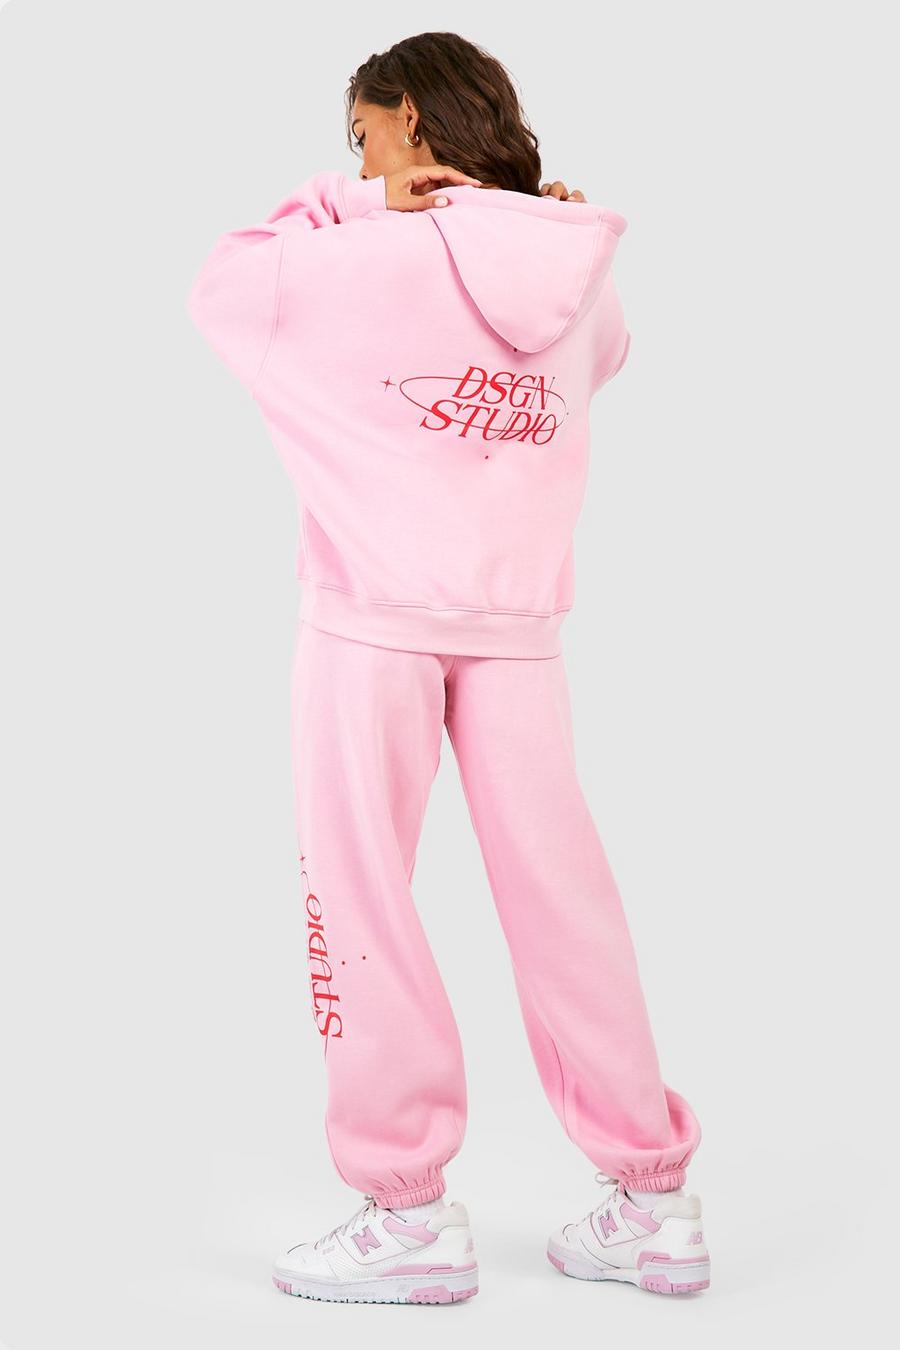 Light pink Dsgn Studio Text Print Hooded Tracksuit